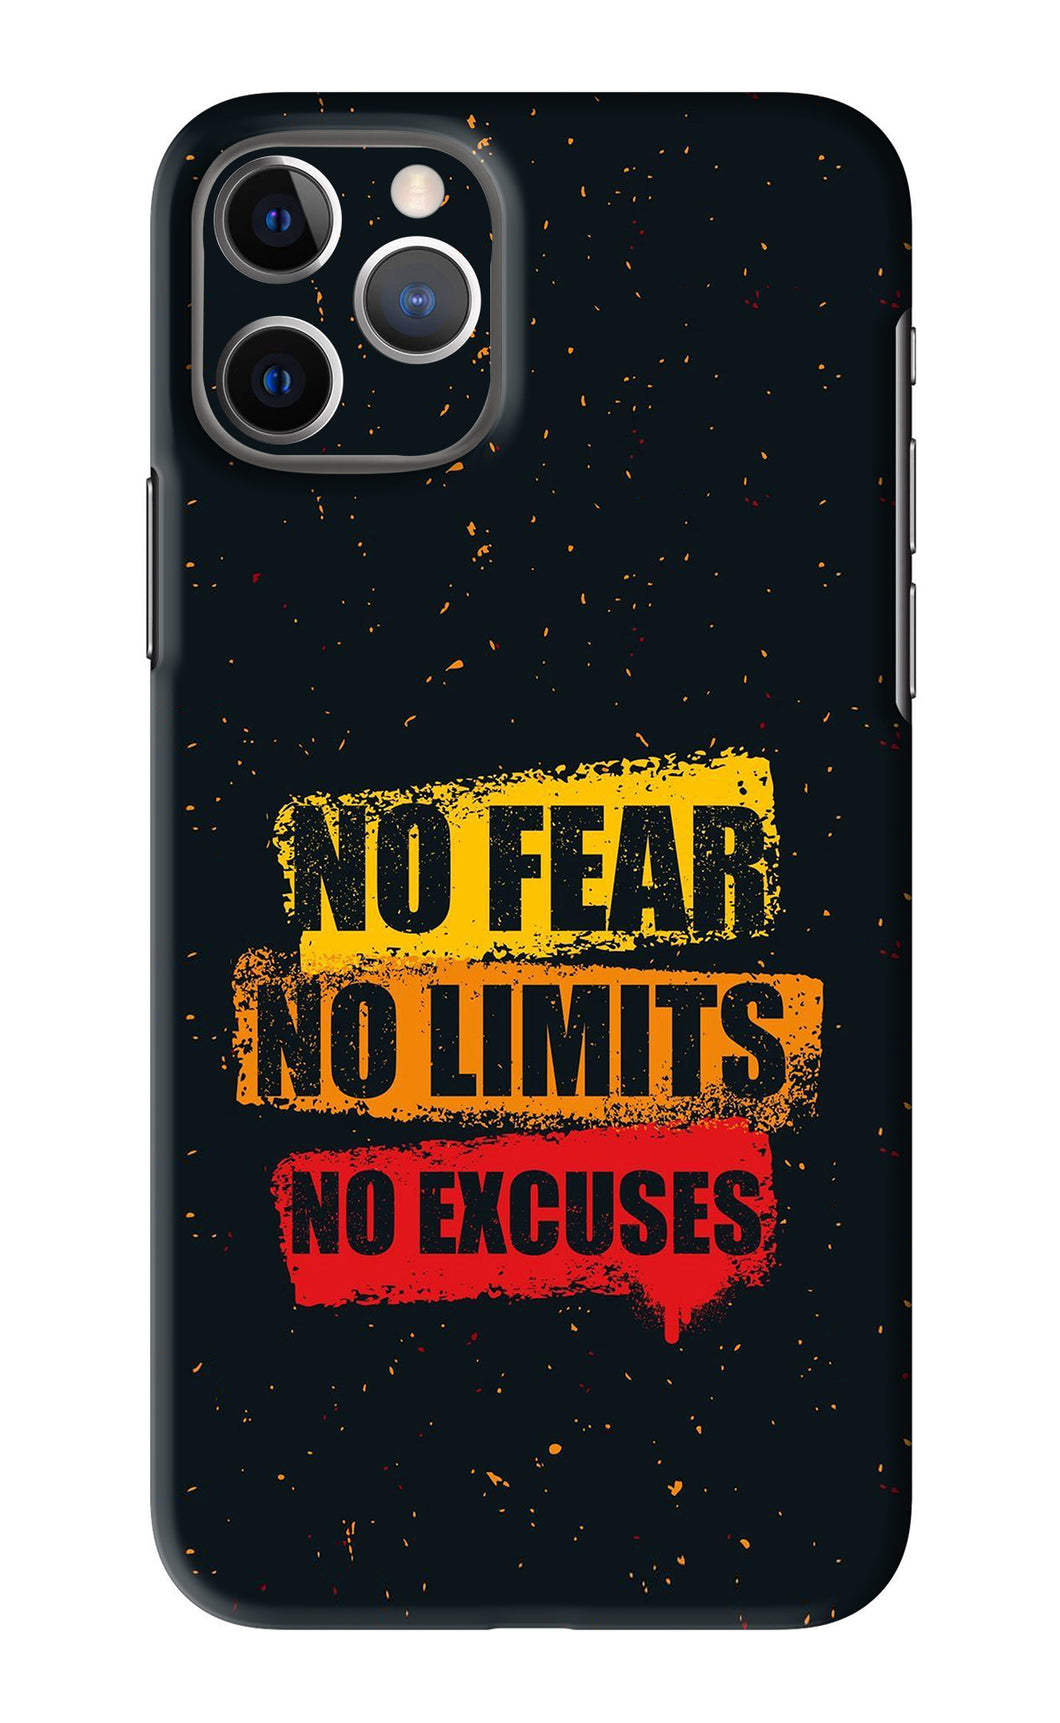 No Fear No Limits No Excuses iPhone 11 Pro Back Skin Wrap